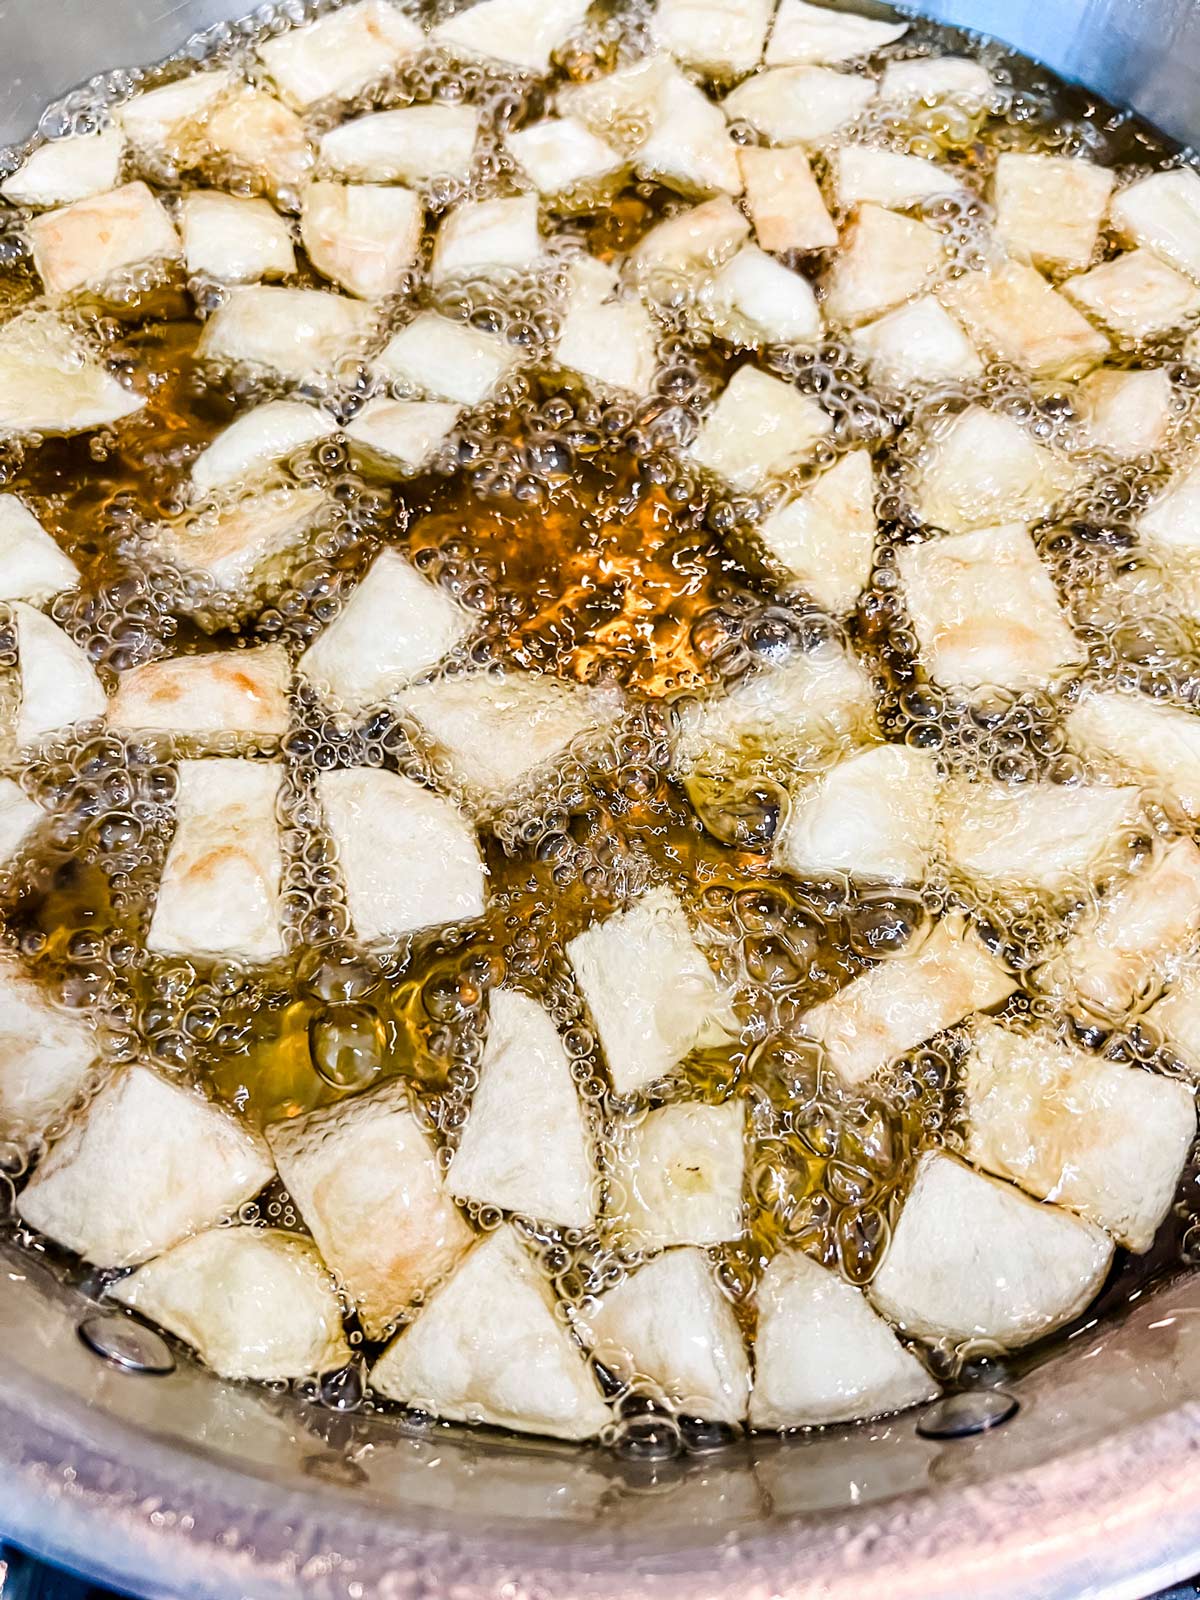 Diced potatoes frying in a skillet.